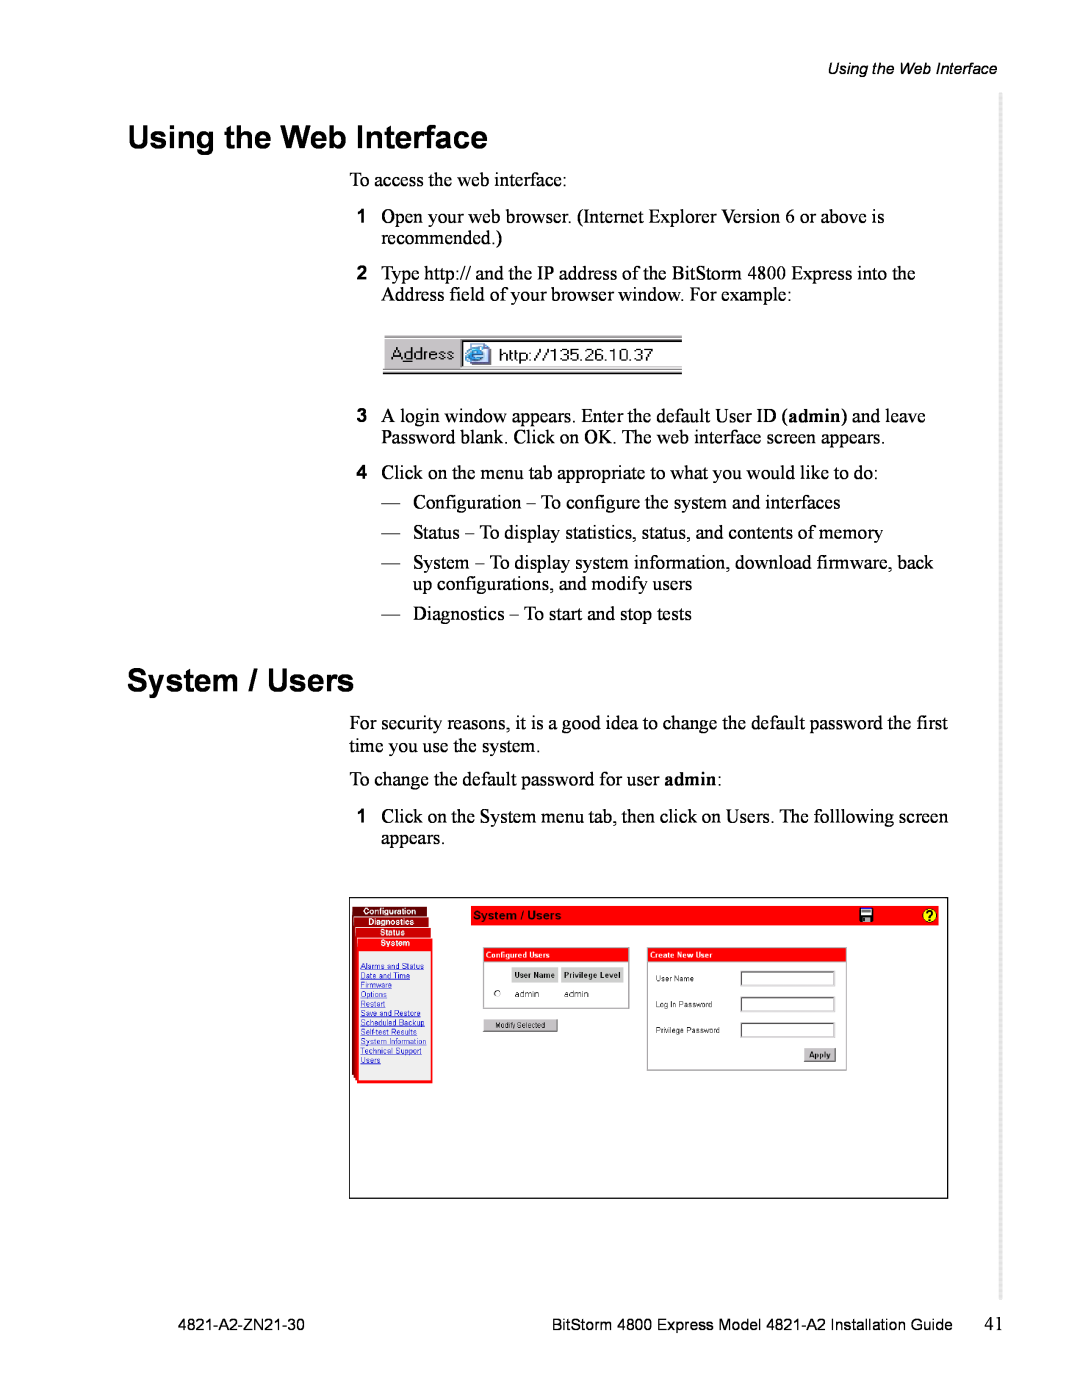 Zhone Technologies 4821-A2 manual Using the Web Interface, System / Users 